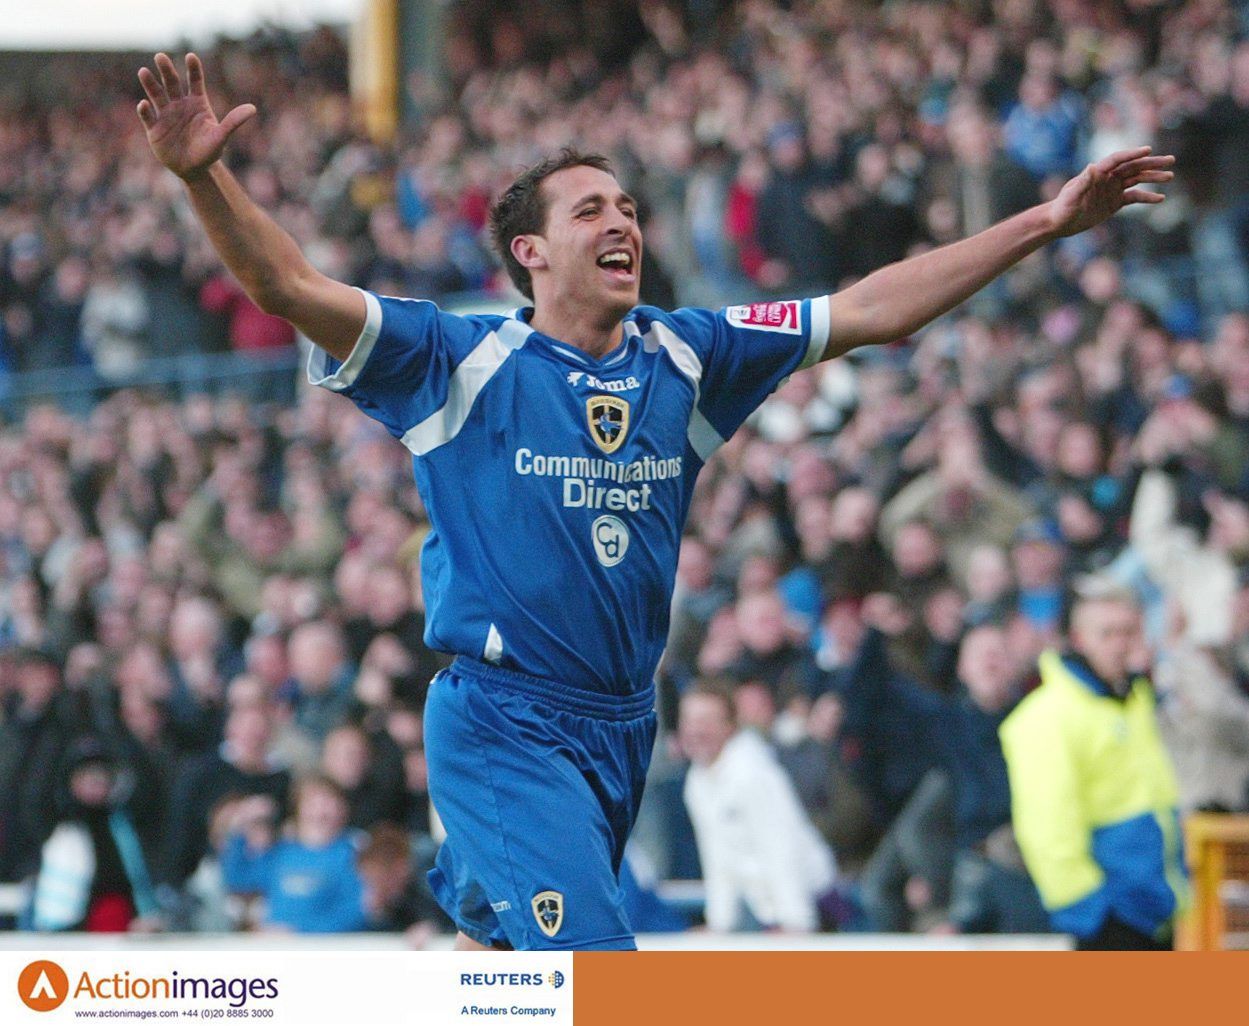 Football - Cardiff City v Leicester City Coca-Cola Football League Championship  - Ninian Park - 27/1/07 
Cardiff's Michael Chopra celebrates after scoring the third goal to complete his hat-trick 
Mandatory Credit: Action Images / Andrew Boyers 
Livepic